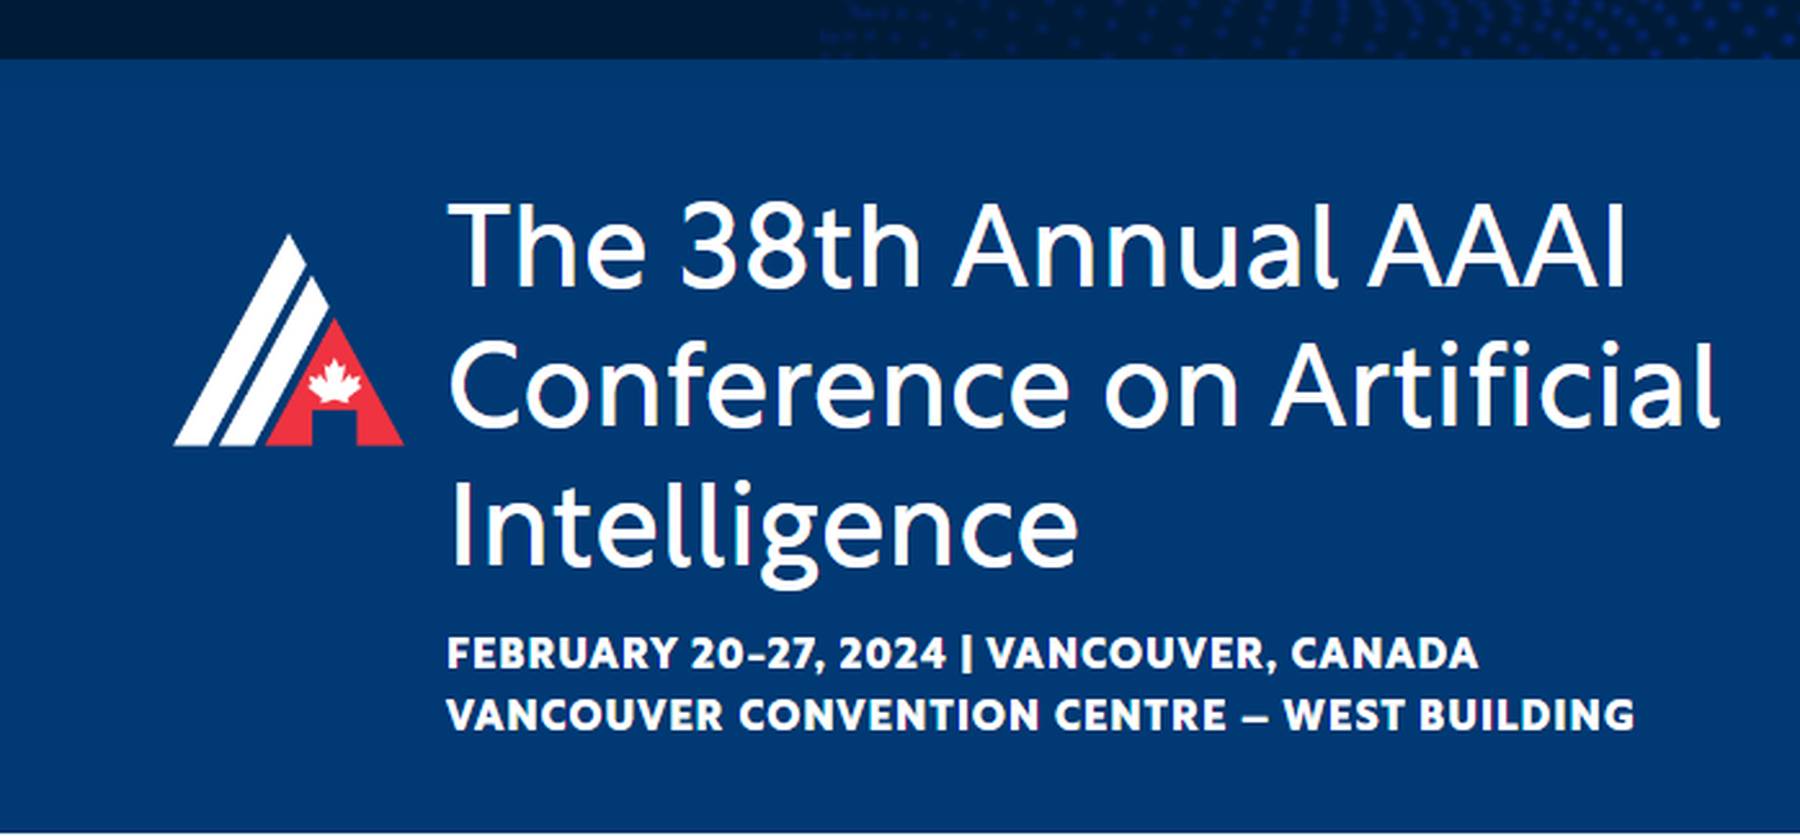 The 38th Annual AAAI Conference on Artificial Intelligence 2024